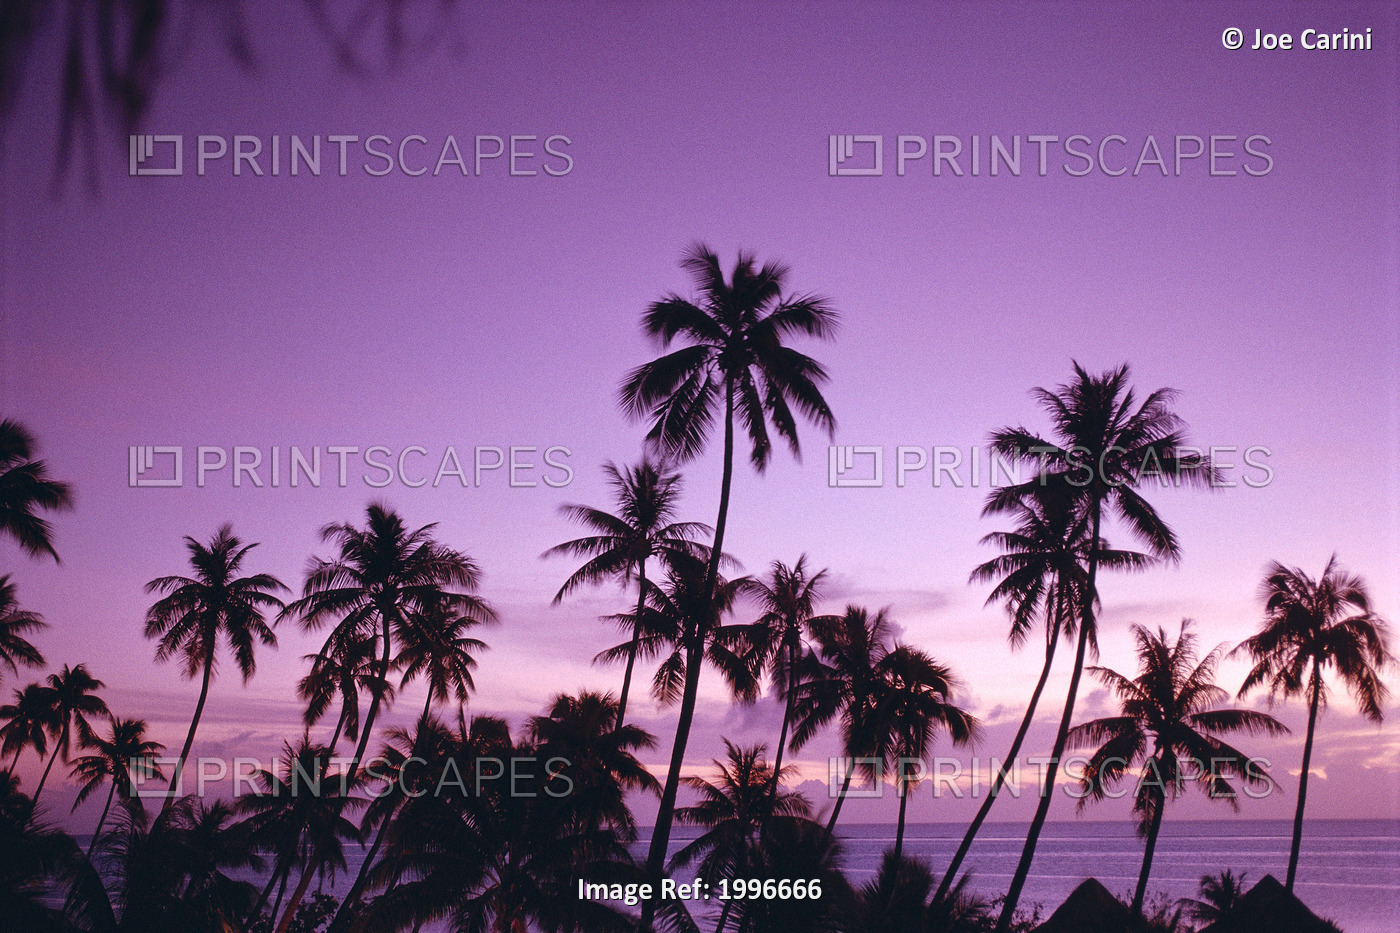 French Polynesia, Tahiti, Island Sunset Over Ocean, Palm Trees Silhouetted A58B